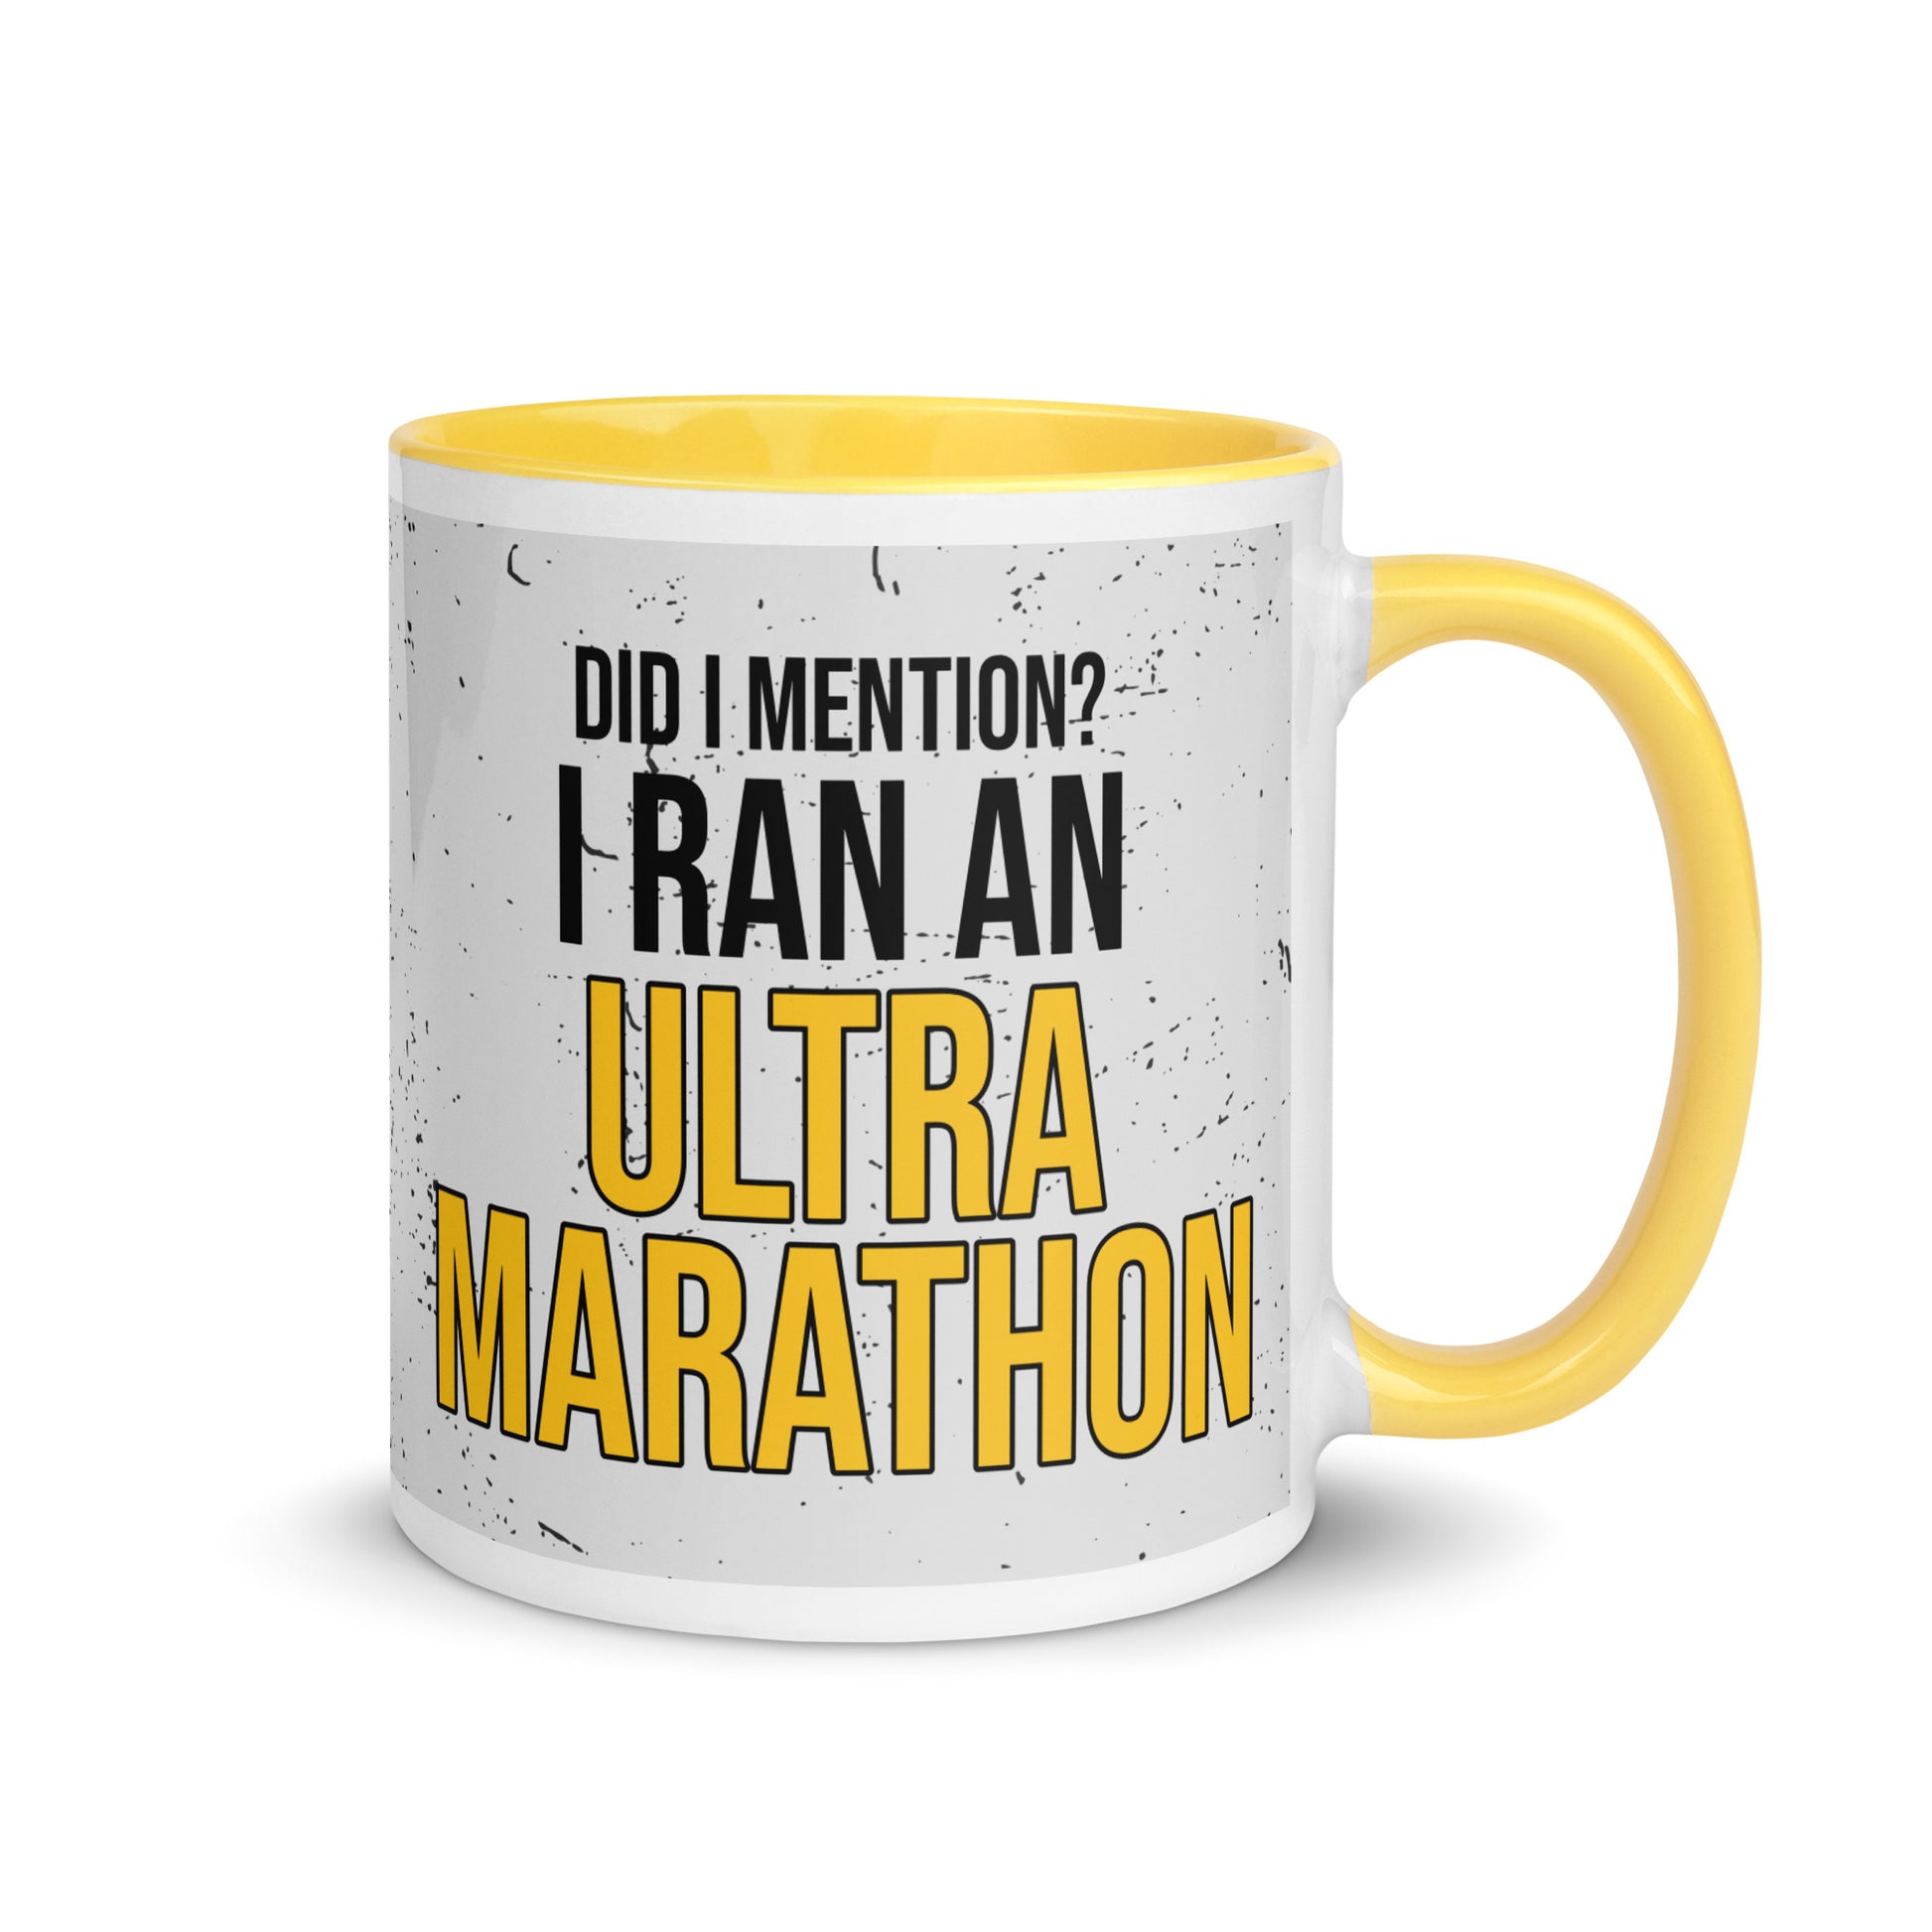 coffee mug with yellow rim and handle, with a paint splatter design around the mug, and the words Did i mention? i ran an ultra marathon in a bold font. a gift for people who have completed an ultra marathon.  